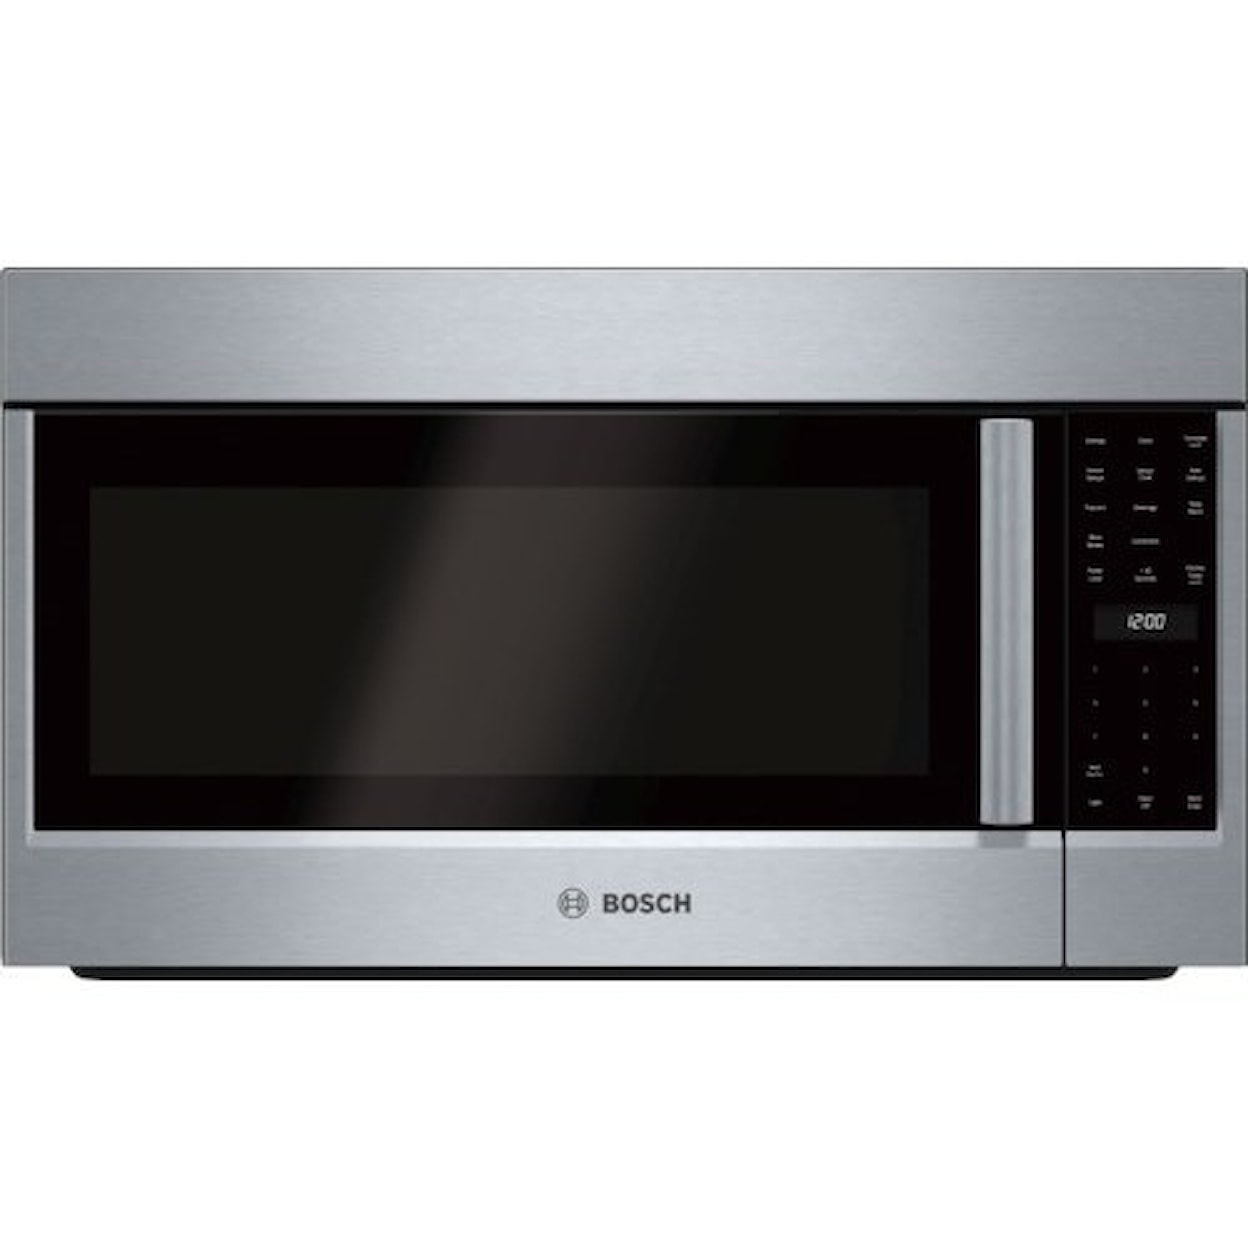 Bosch Microwaves 30" Over-the-Range Convection Microwave